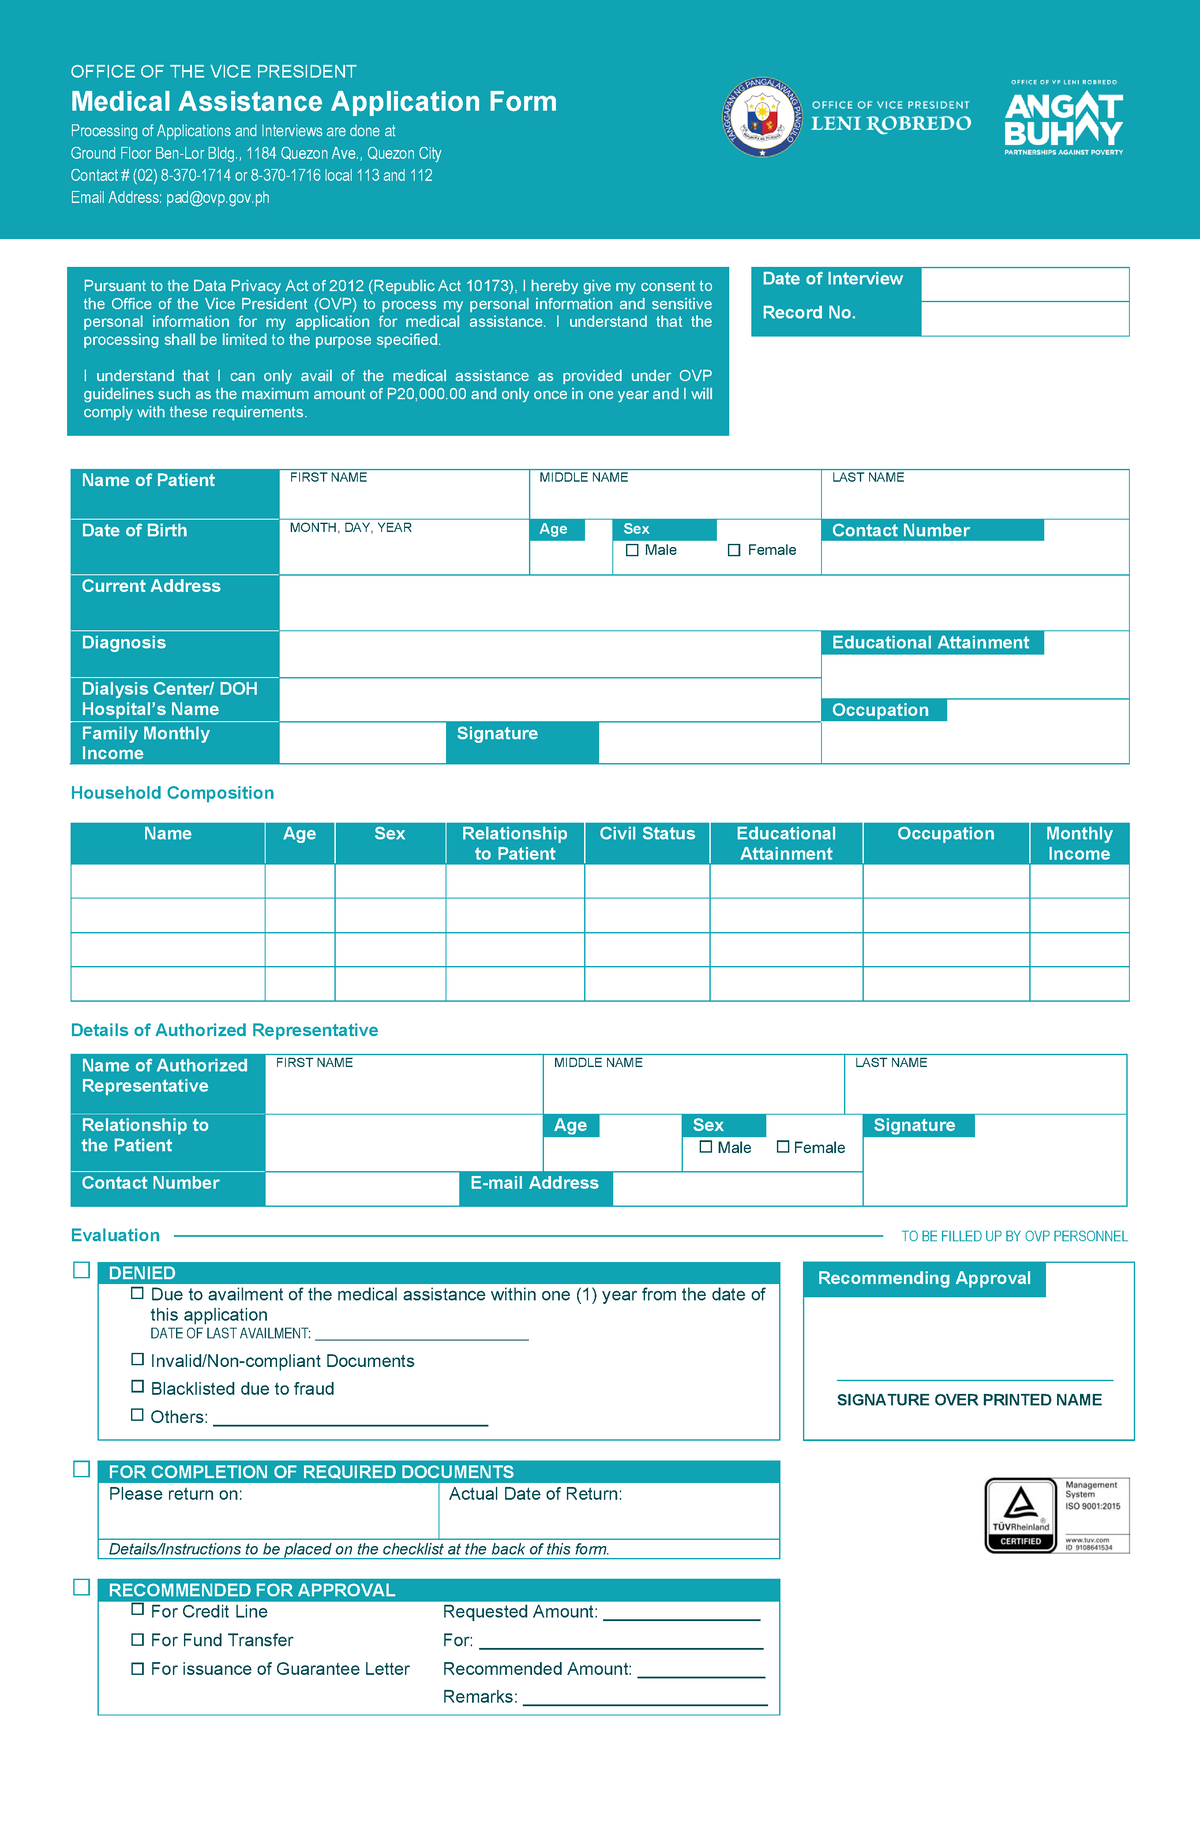 Revised Med Assistance Form 07142021 Office Of The Vice President Medical Assistance 3677